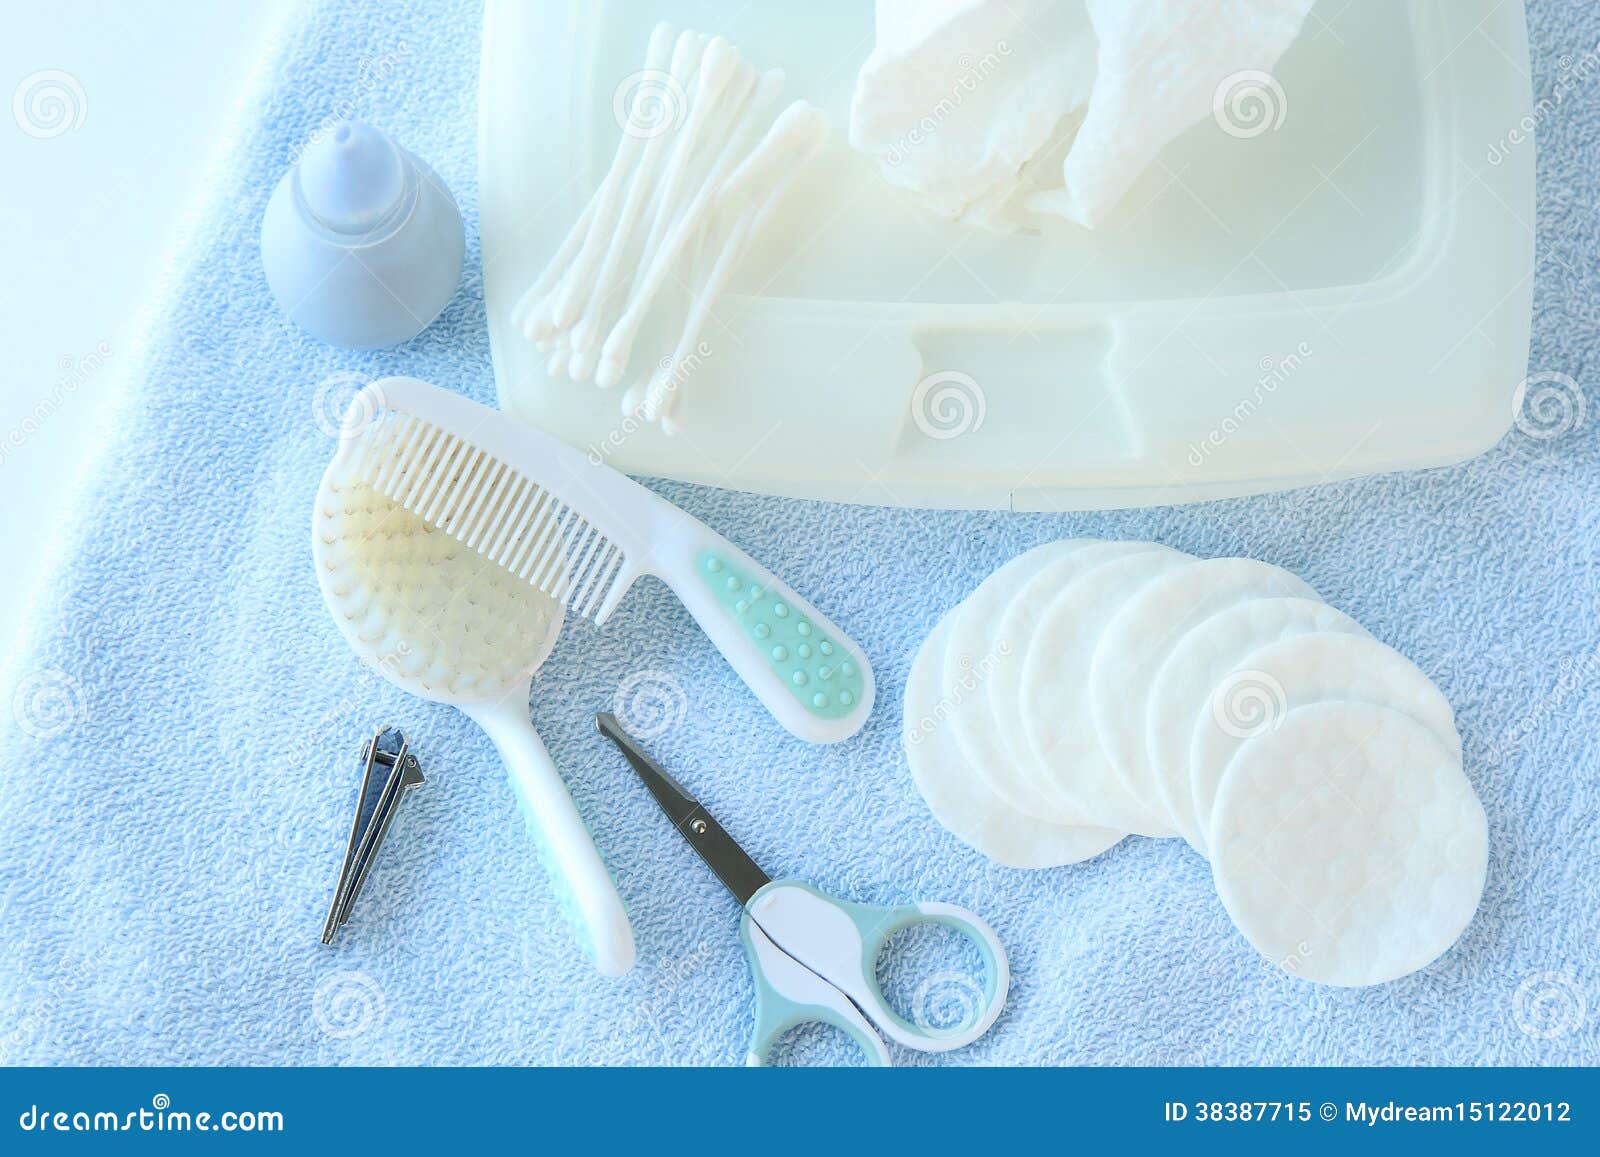 hygienic items for baby